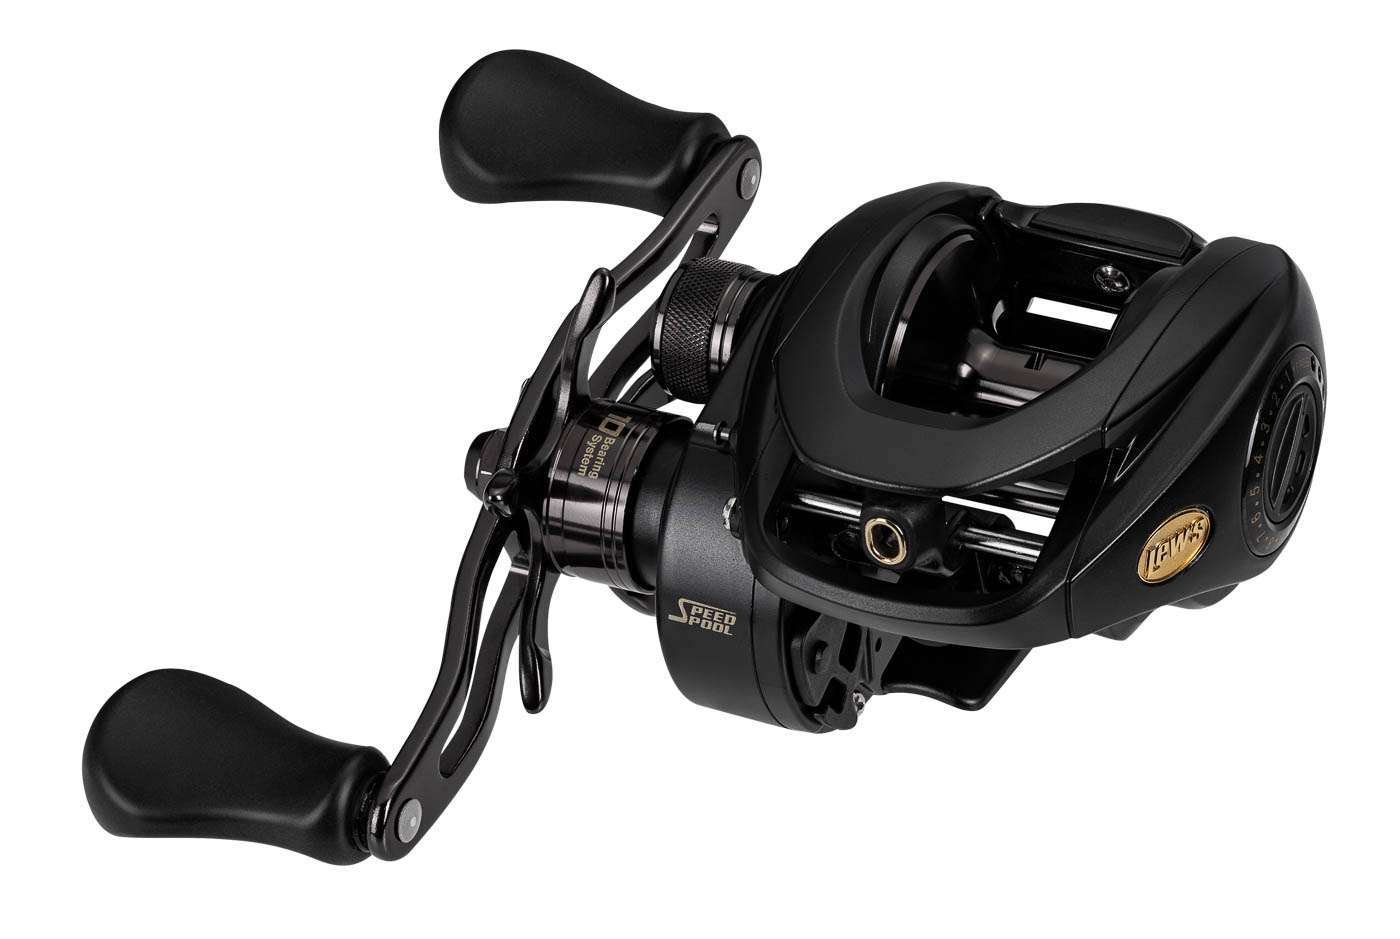 <p><strong>Lewâs BB1 Pro LFS Baitcasting Reel</strong></p><p>Upgrades to the ever-popular BB1 add an ergonomically, tapered and lightweight aluminum frame with graphite side plates and Lewâs new custom paddle grips. What sets the BB1 Pro LFS apart is the performance of the 27-position QuietCast Adjustable Centrifugal Braking System, delivering precise control of spool breaking and exceptional casting. An additional feature on the BB1 Pro LFS is the dual stage titanium-coated line guide, which is positioned farther away from the spool for reduced line friction and maximized casting performance. The new BB1 Pro LFS Baitcast reel is available in three gear ratios.  The PRO1H model sports a 6.2:1 ratio. $199.99. <a href=